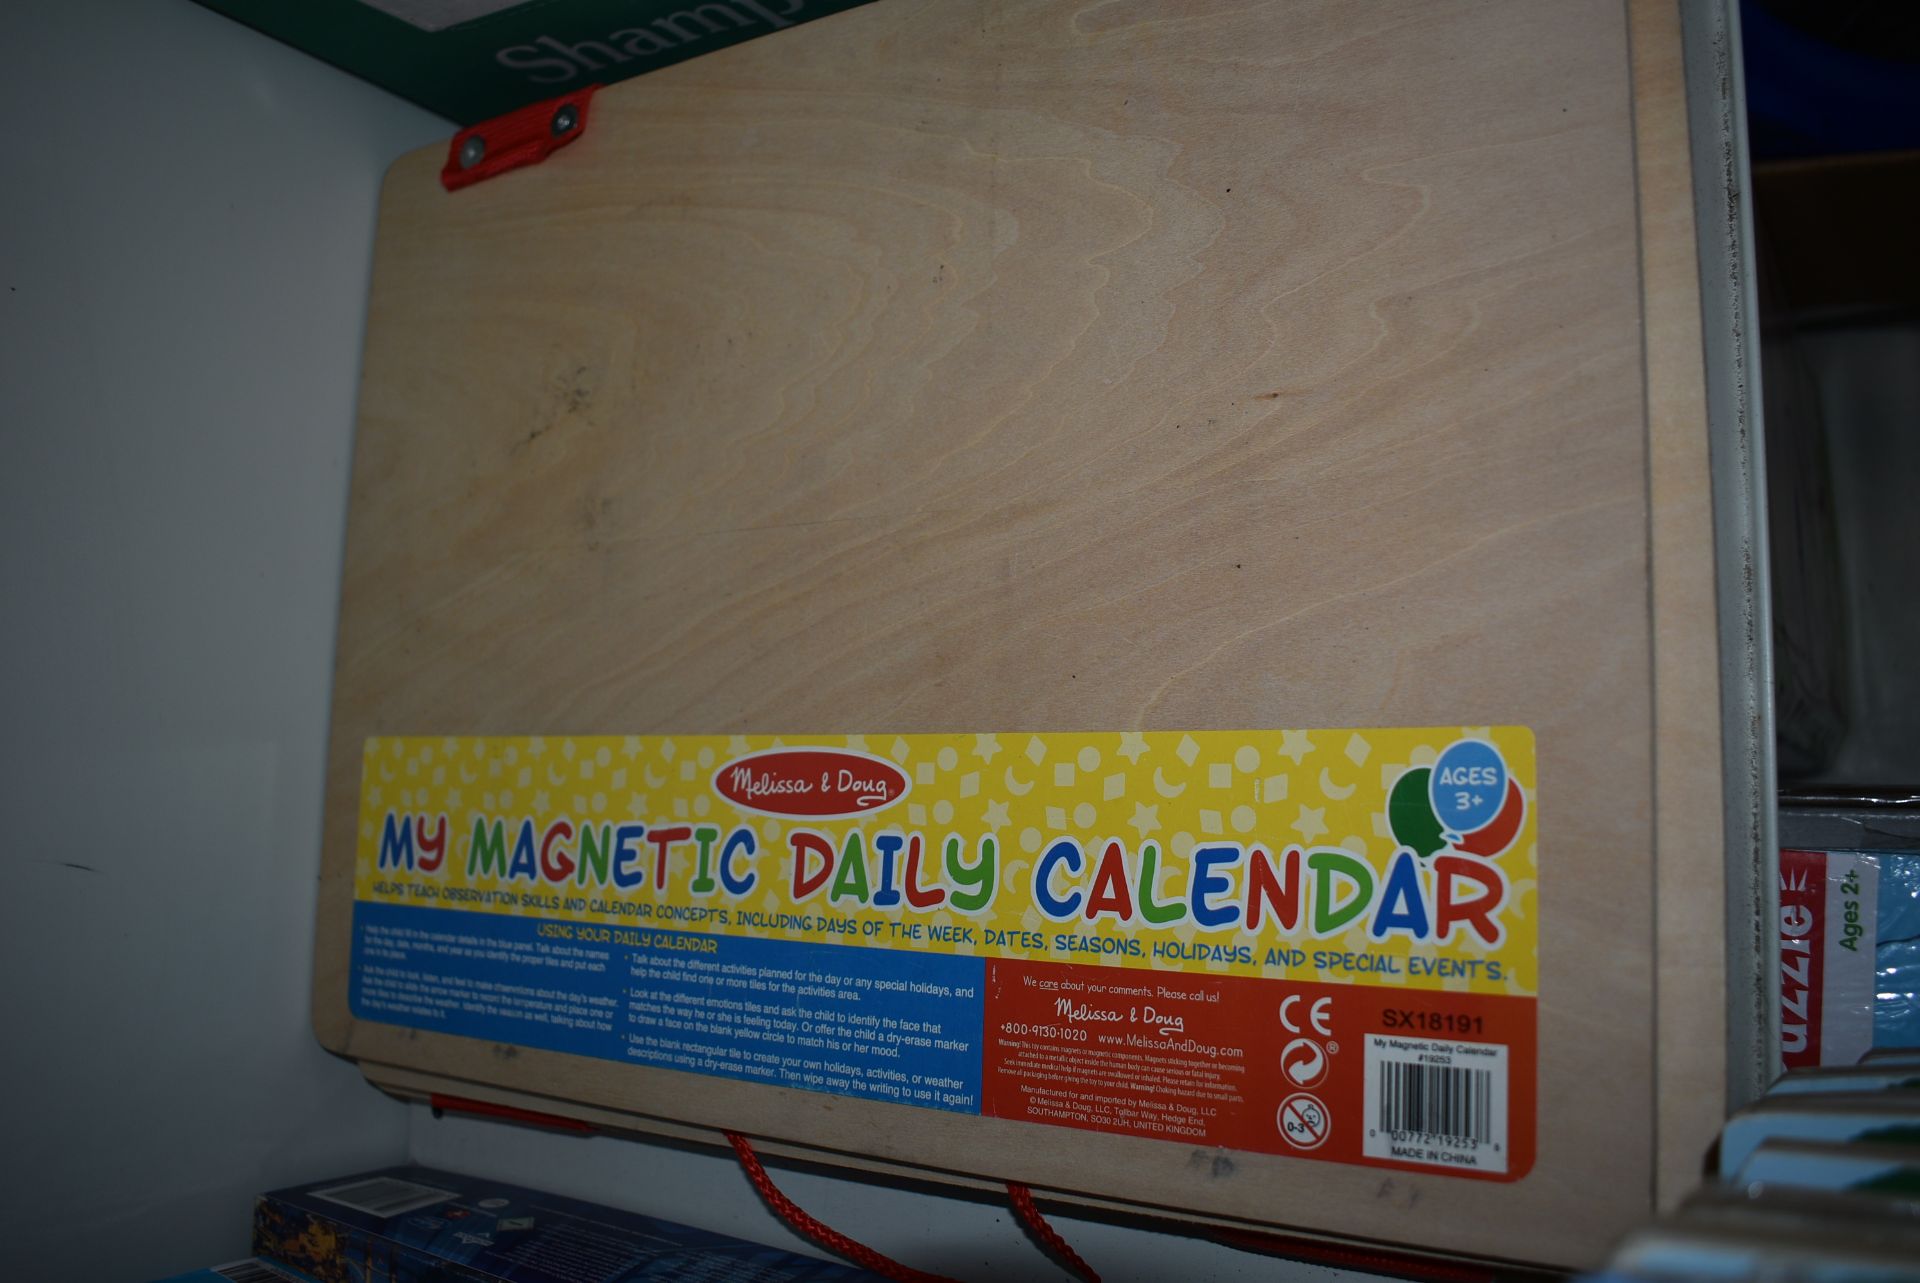 Fourteen See & Hear Sound Puzzles, and Two Magnetic Calendars - Image 3 of 6